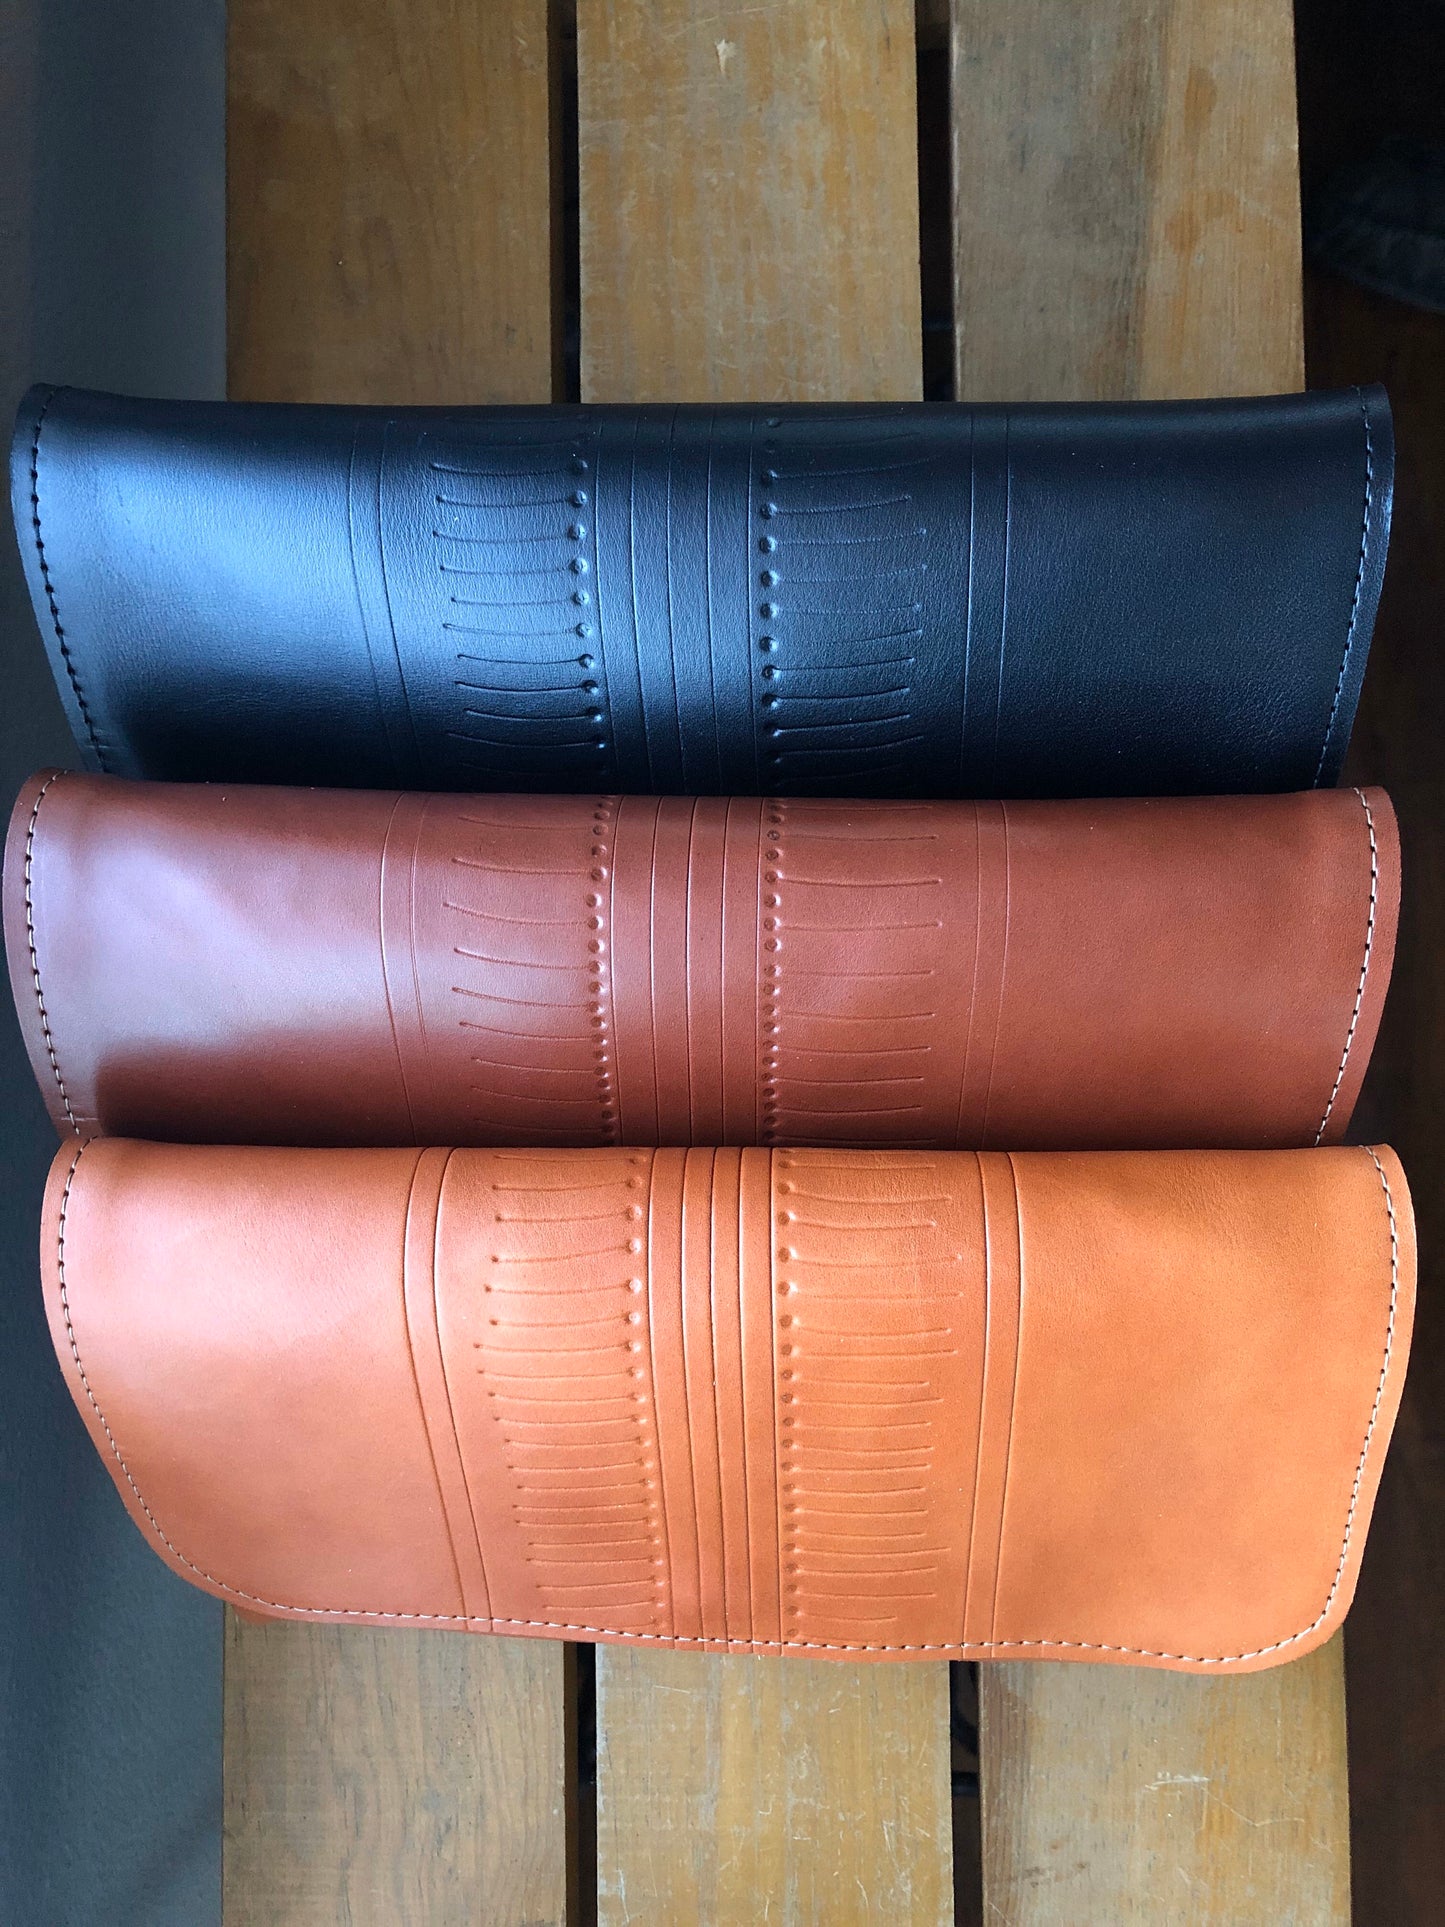 Row of three leather clutches, black, brown, and tan.